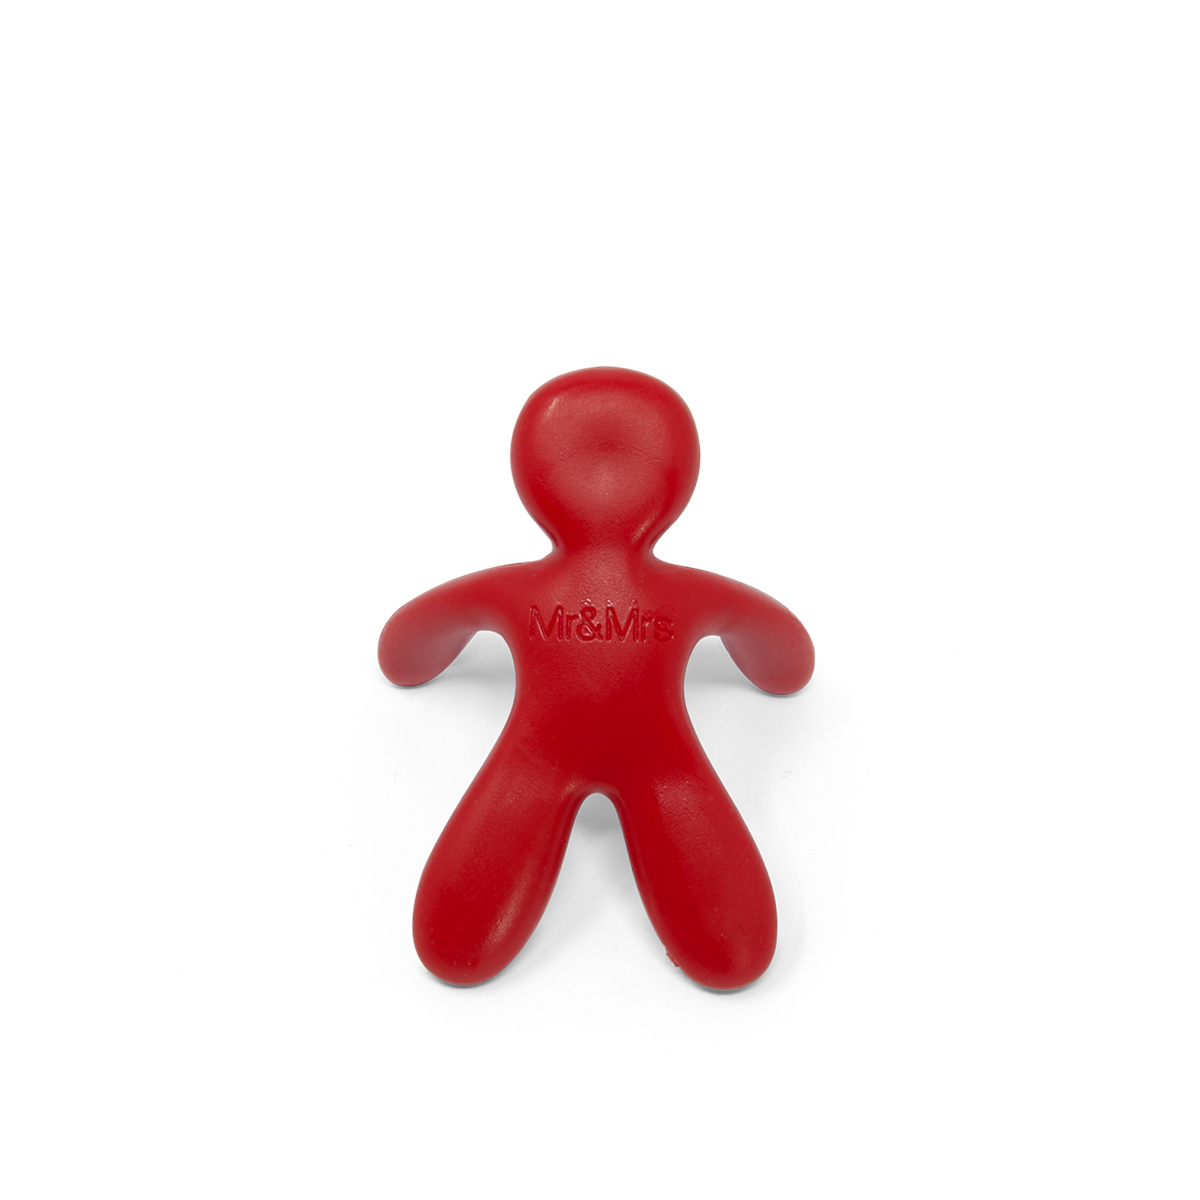 CESARE Air Freshener - RED - PEPPERMINT